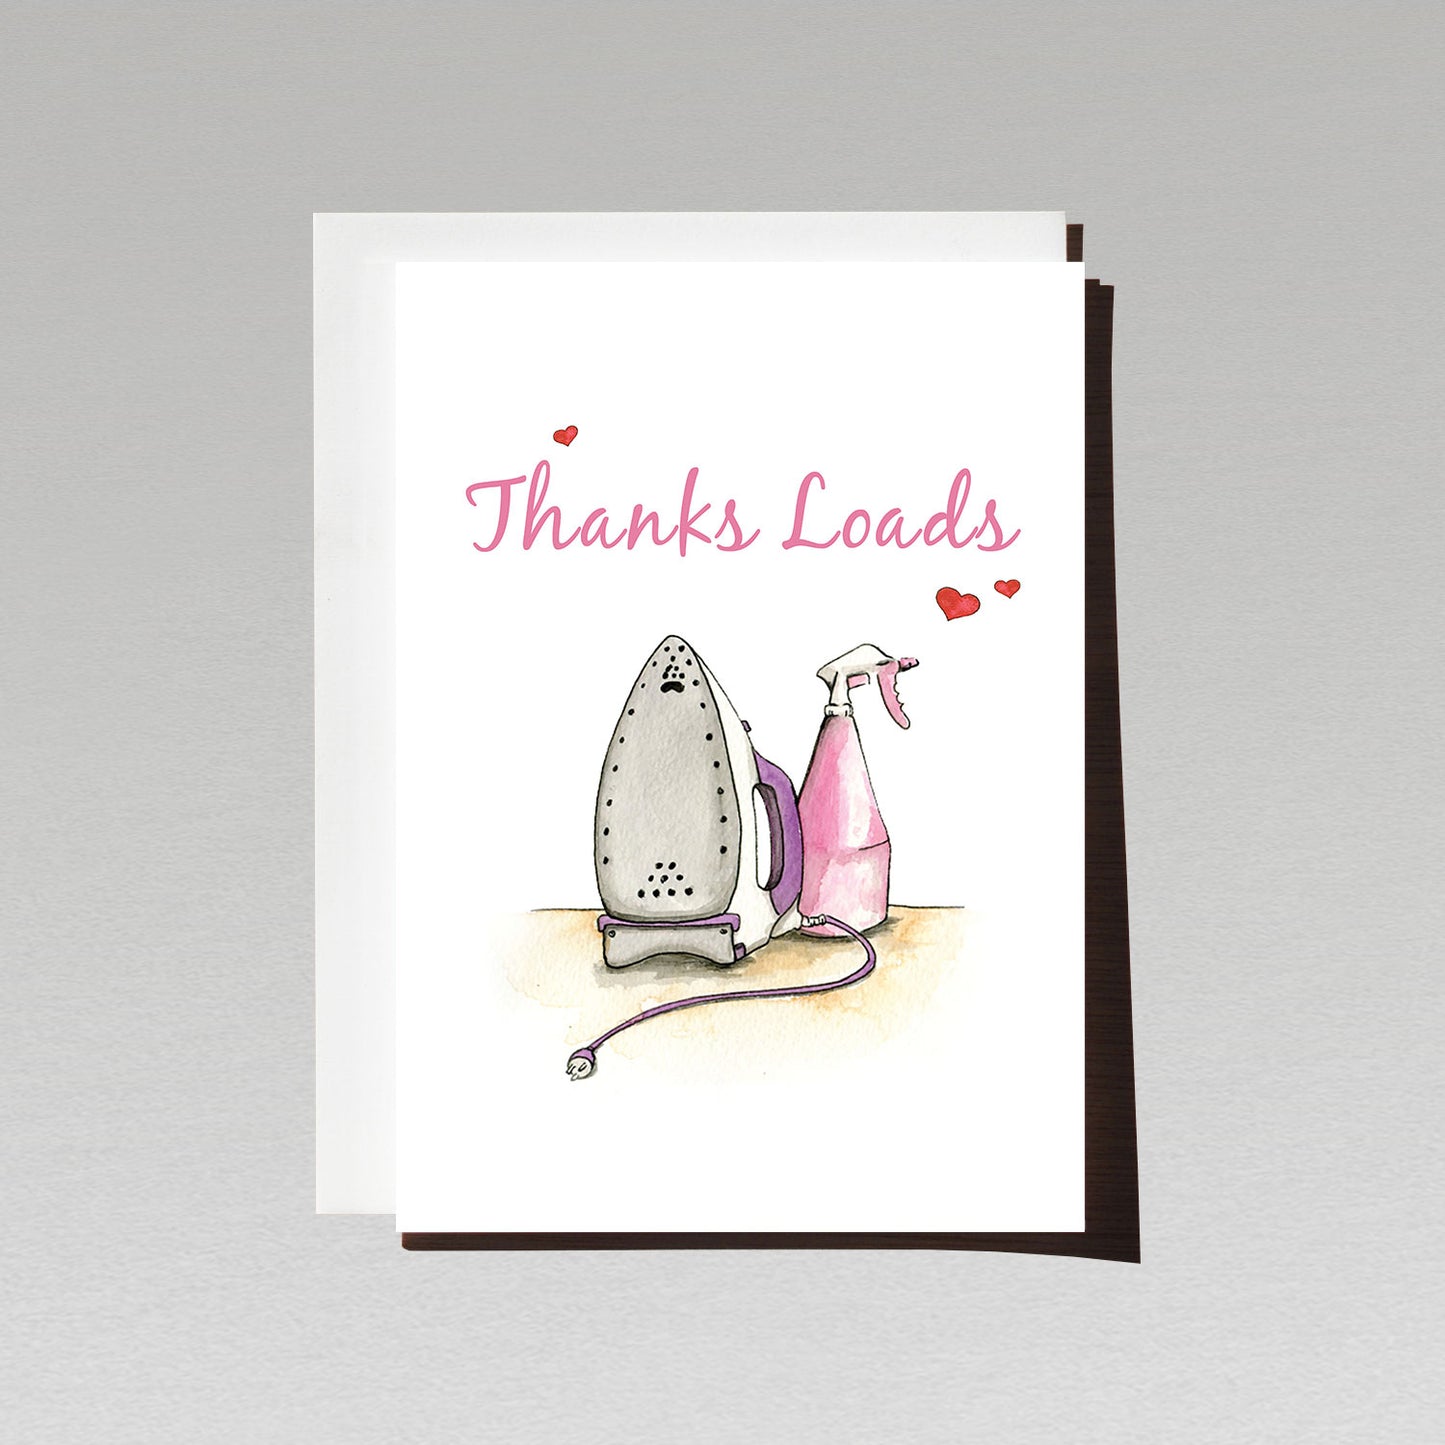 Greeting card with illustration of an iron on white background with pink text Thanks loads